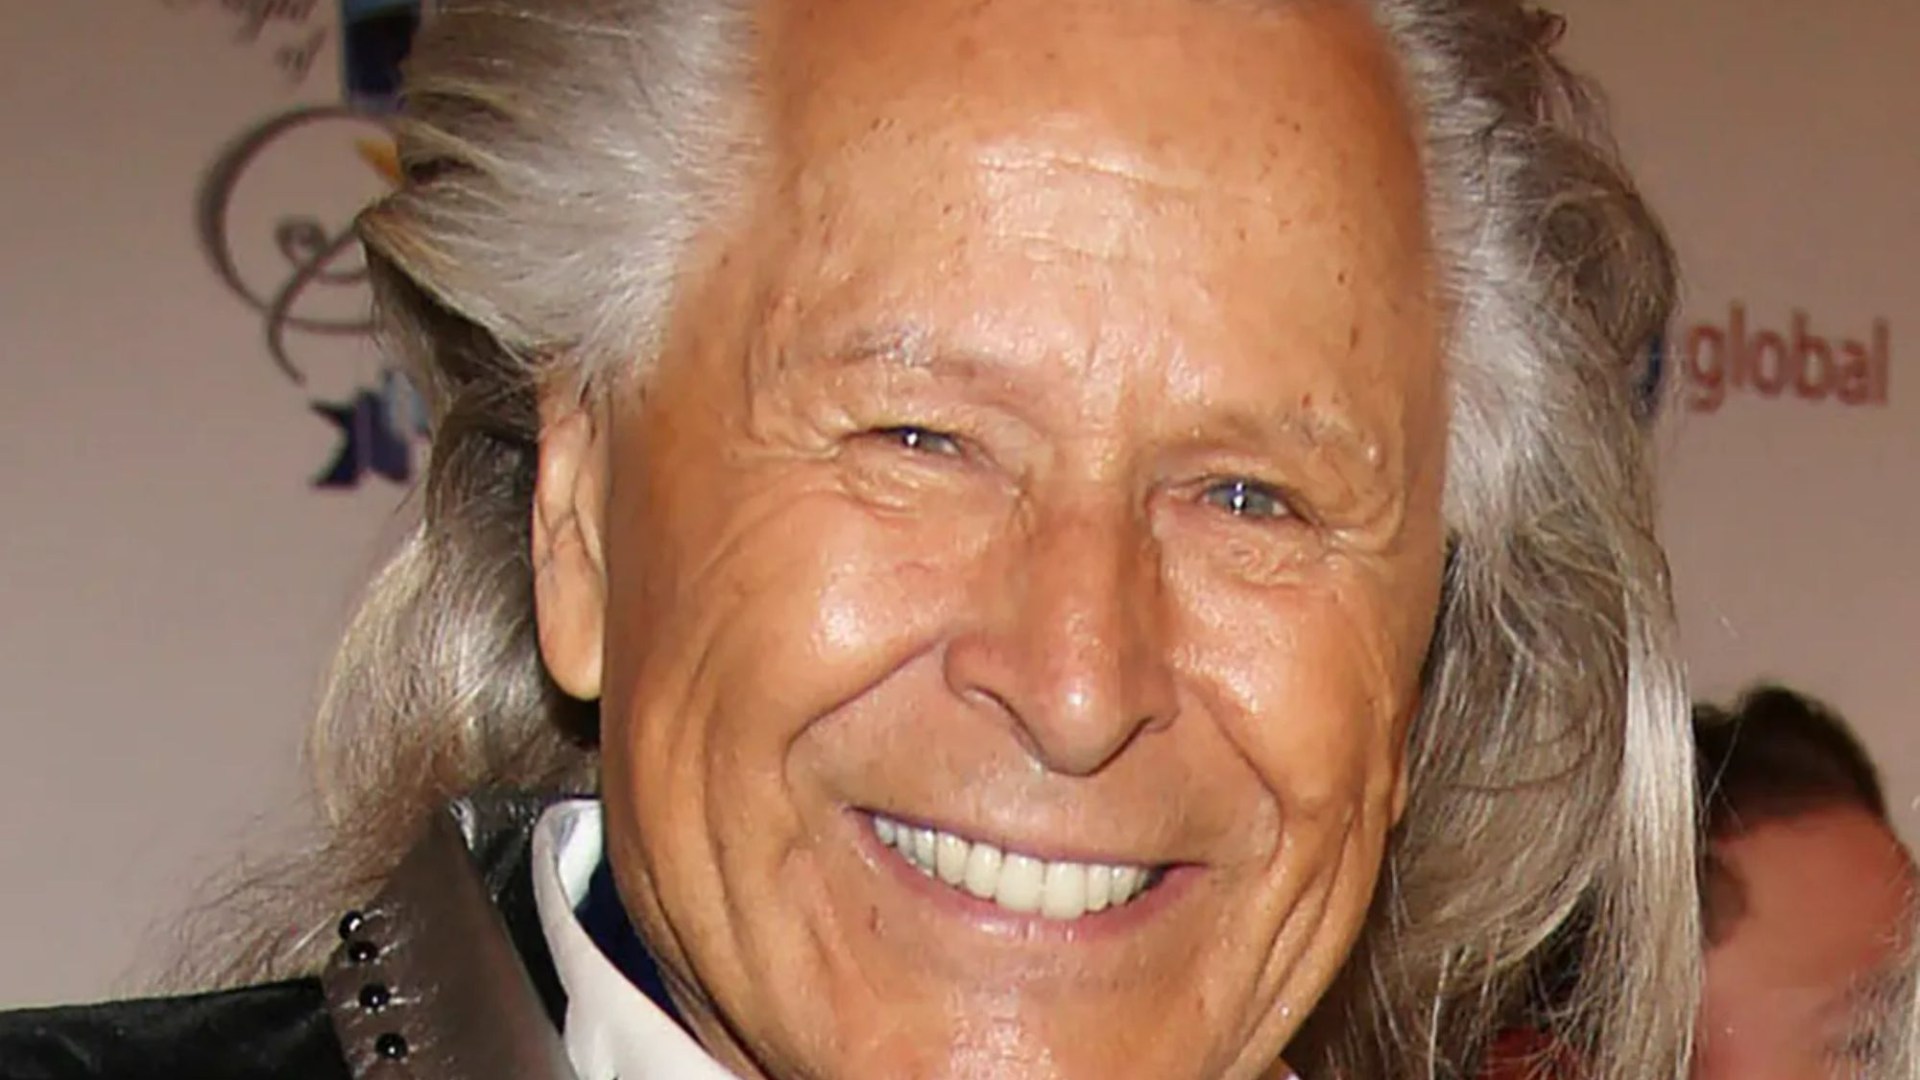 Prince Andrews pal Peter Nygard to be jailed for sex assault on 4 women fashion mogul lured with fake job interviews [Video]